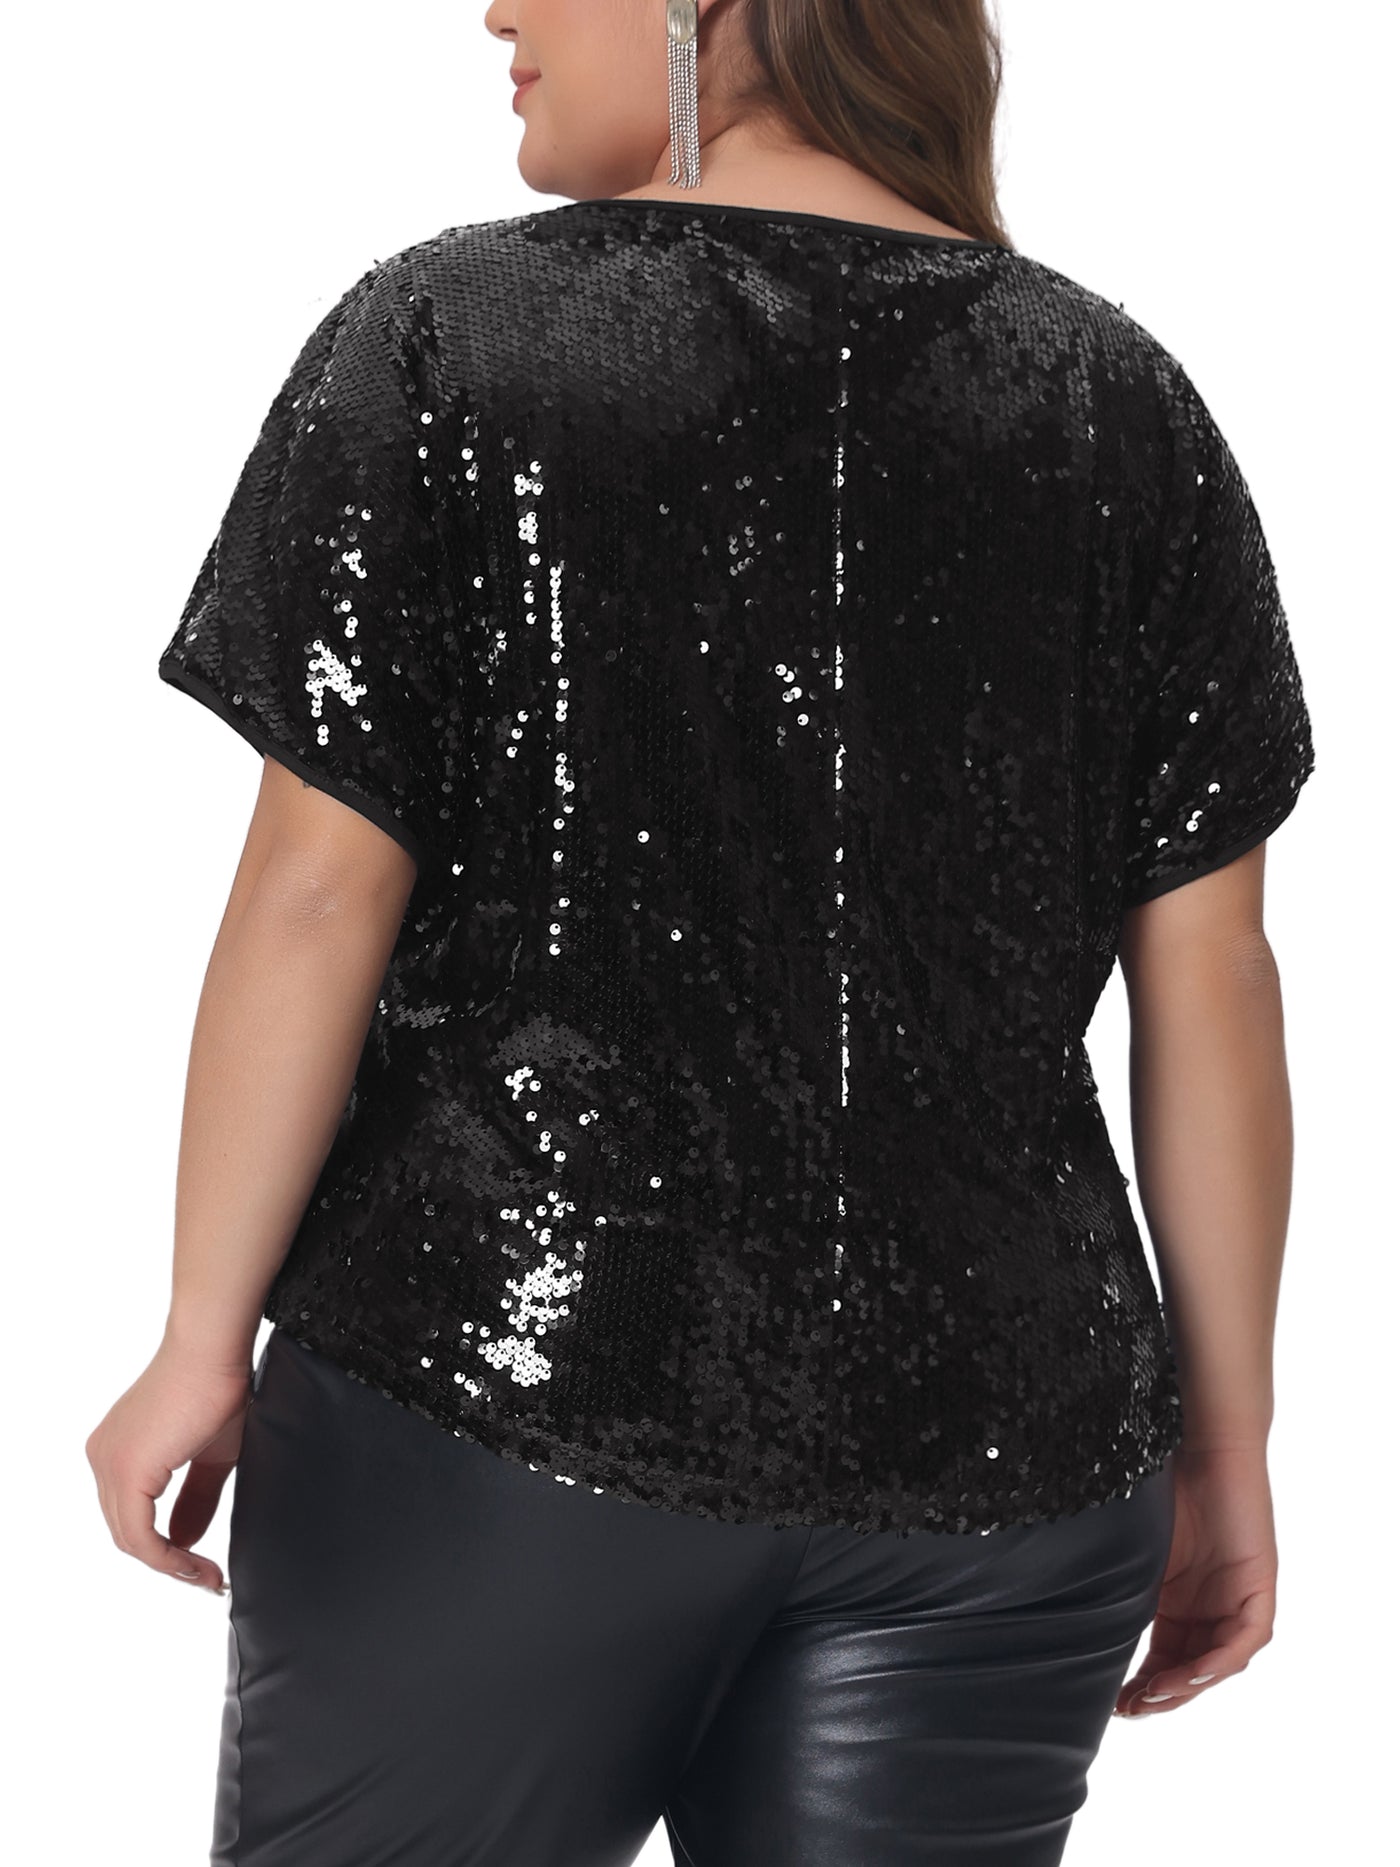 Bublédon Plus Size for Full Sequin Tops Women Glitter Party Shirt Short Sleeve Sparkle Club Night Blouses